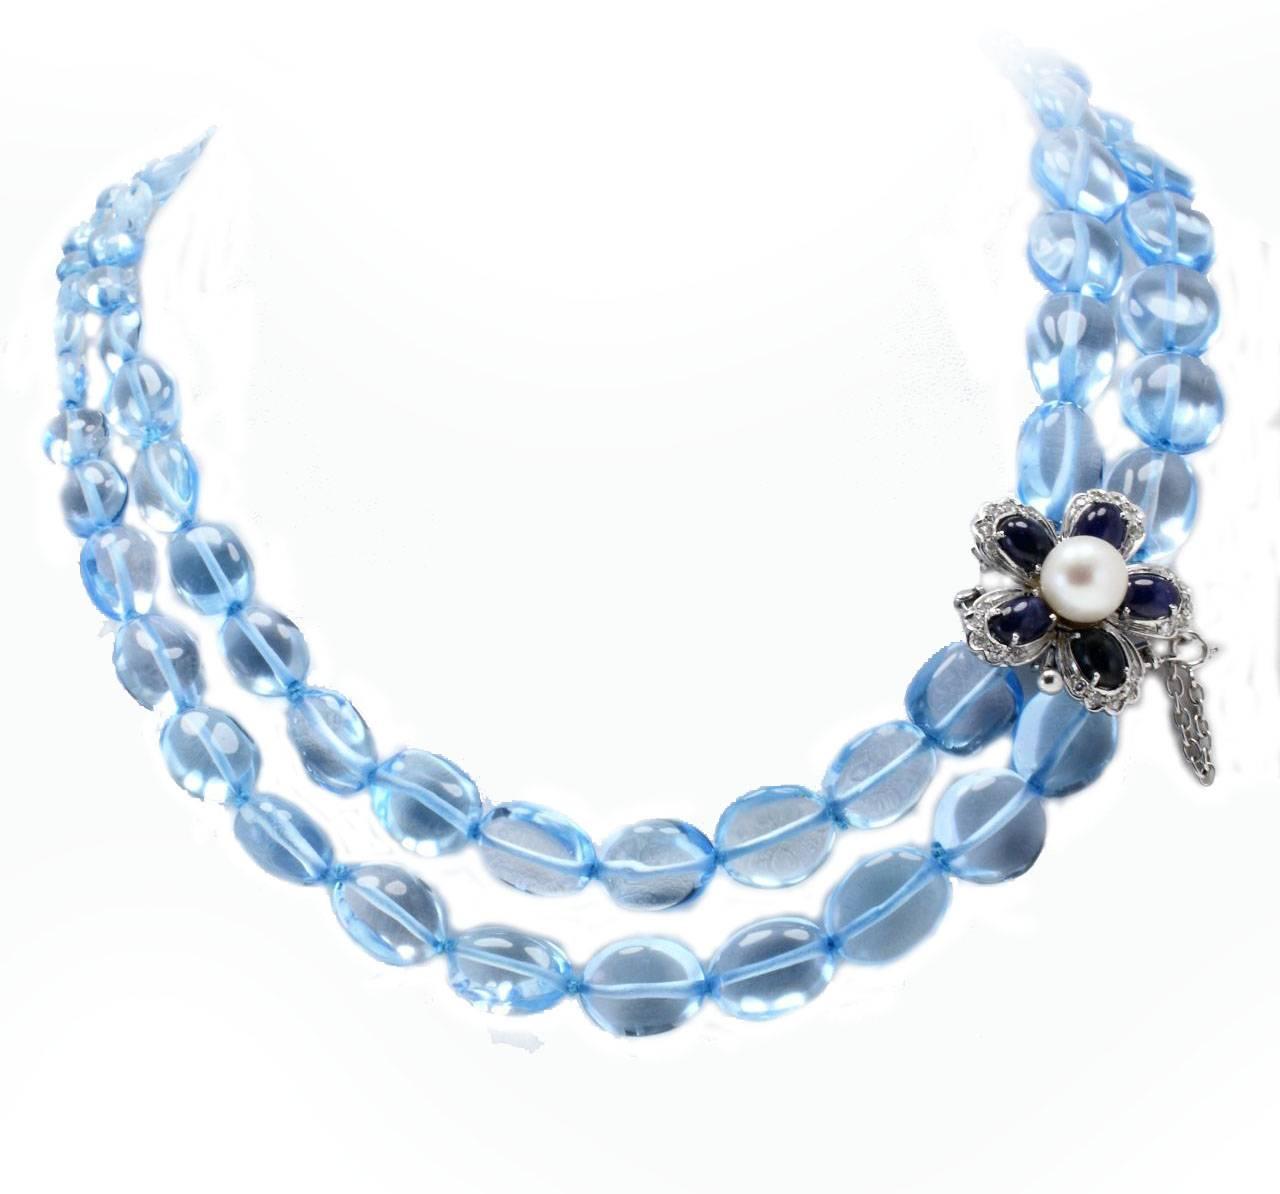 Multi-Strands necklace in 14kt white gold composed of 2 topaz rows, and flower shaped clasp mounted with diamonds blue sapphires and one pearl in the center.
Diamonds 0.38 kt
Blue Sapphires 5.67 kt 
Pearl 0.90 gr
Topaz 110.70 gr
Tot.Weight 121.30